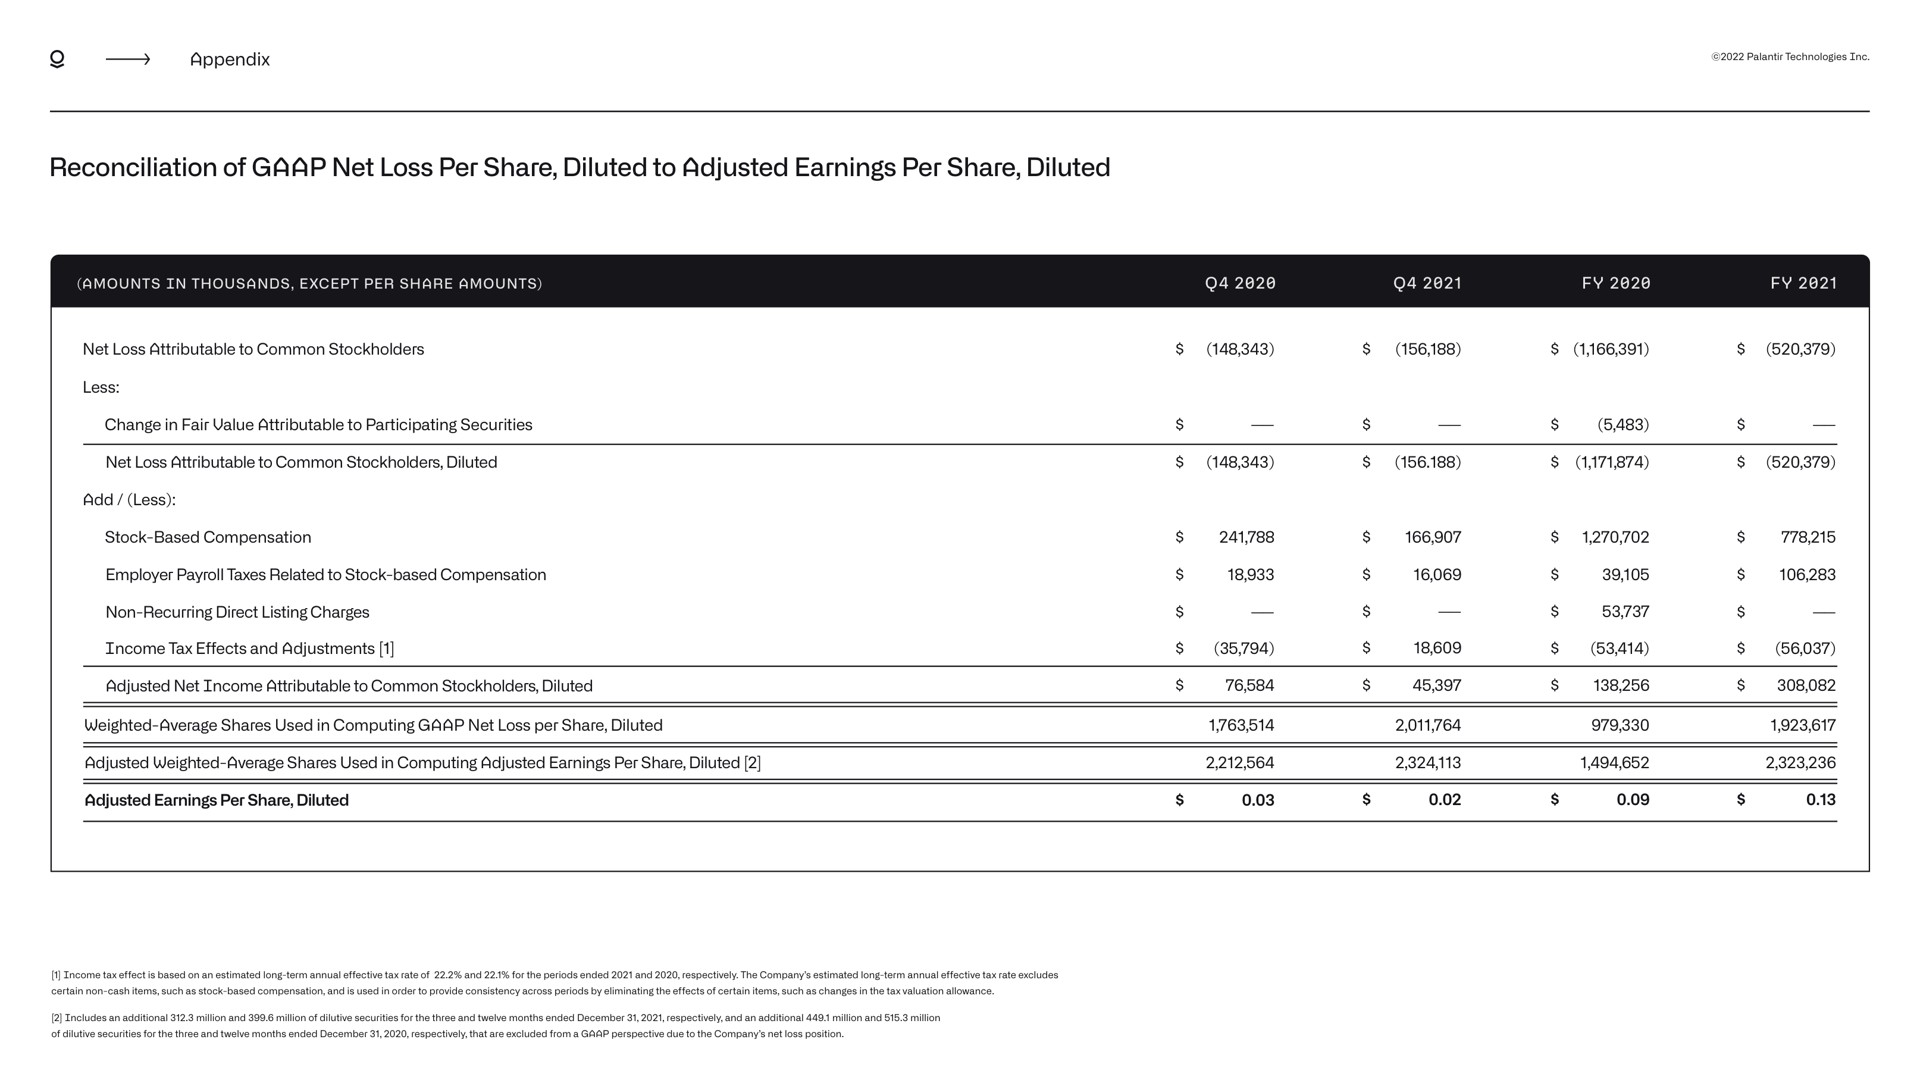 appendix reconciliation of net loss per share diluted to adjusted earnings per share diluted | Palantir